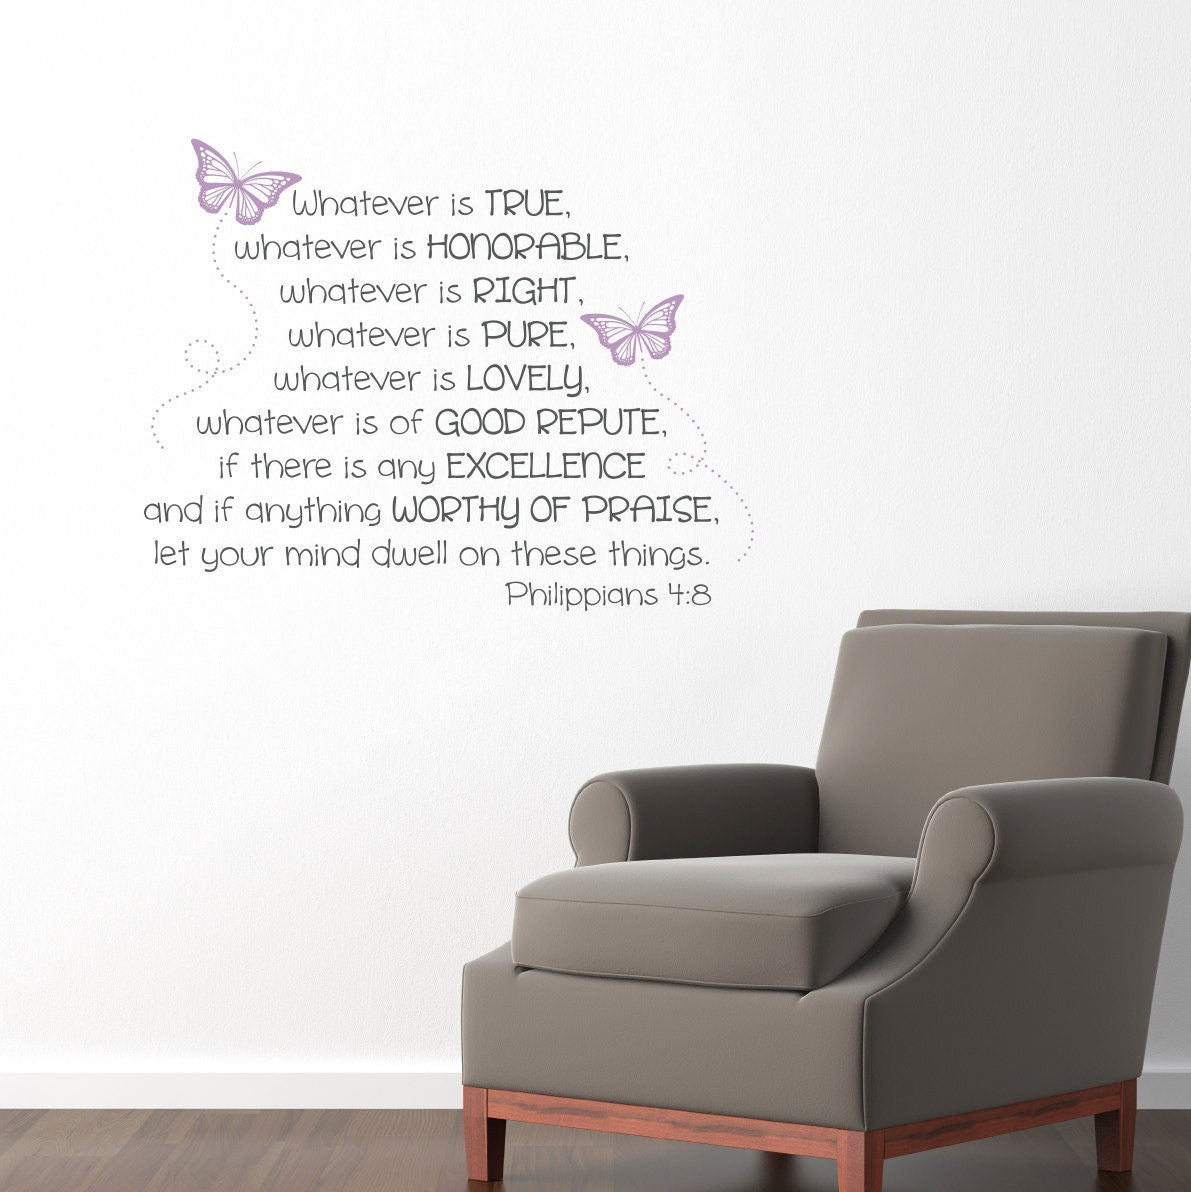 Philippians 4:8 Decal - Whatever is true - Christian Wall Decor - Bible Verse Decal - Medium